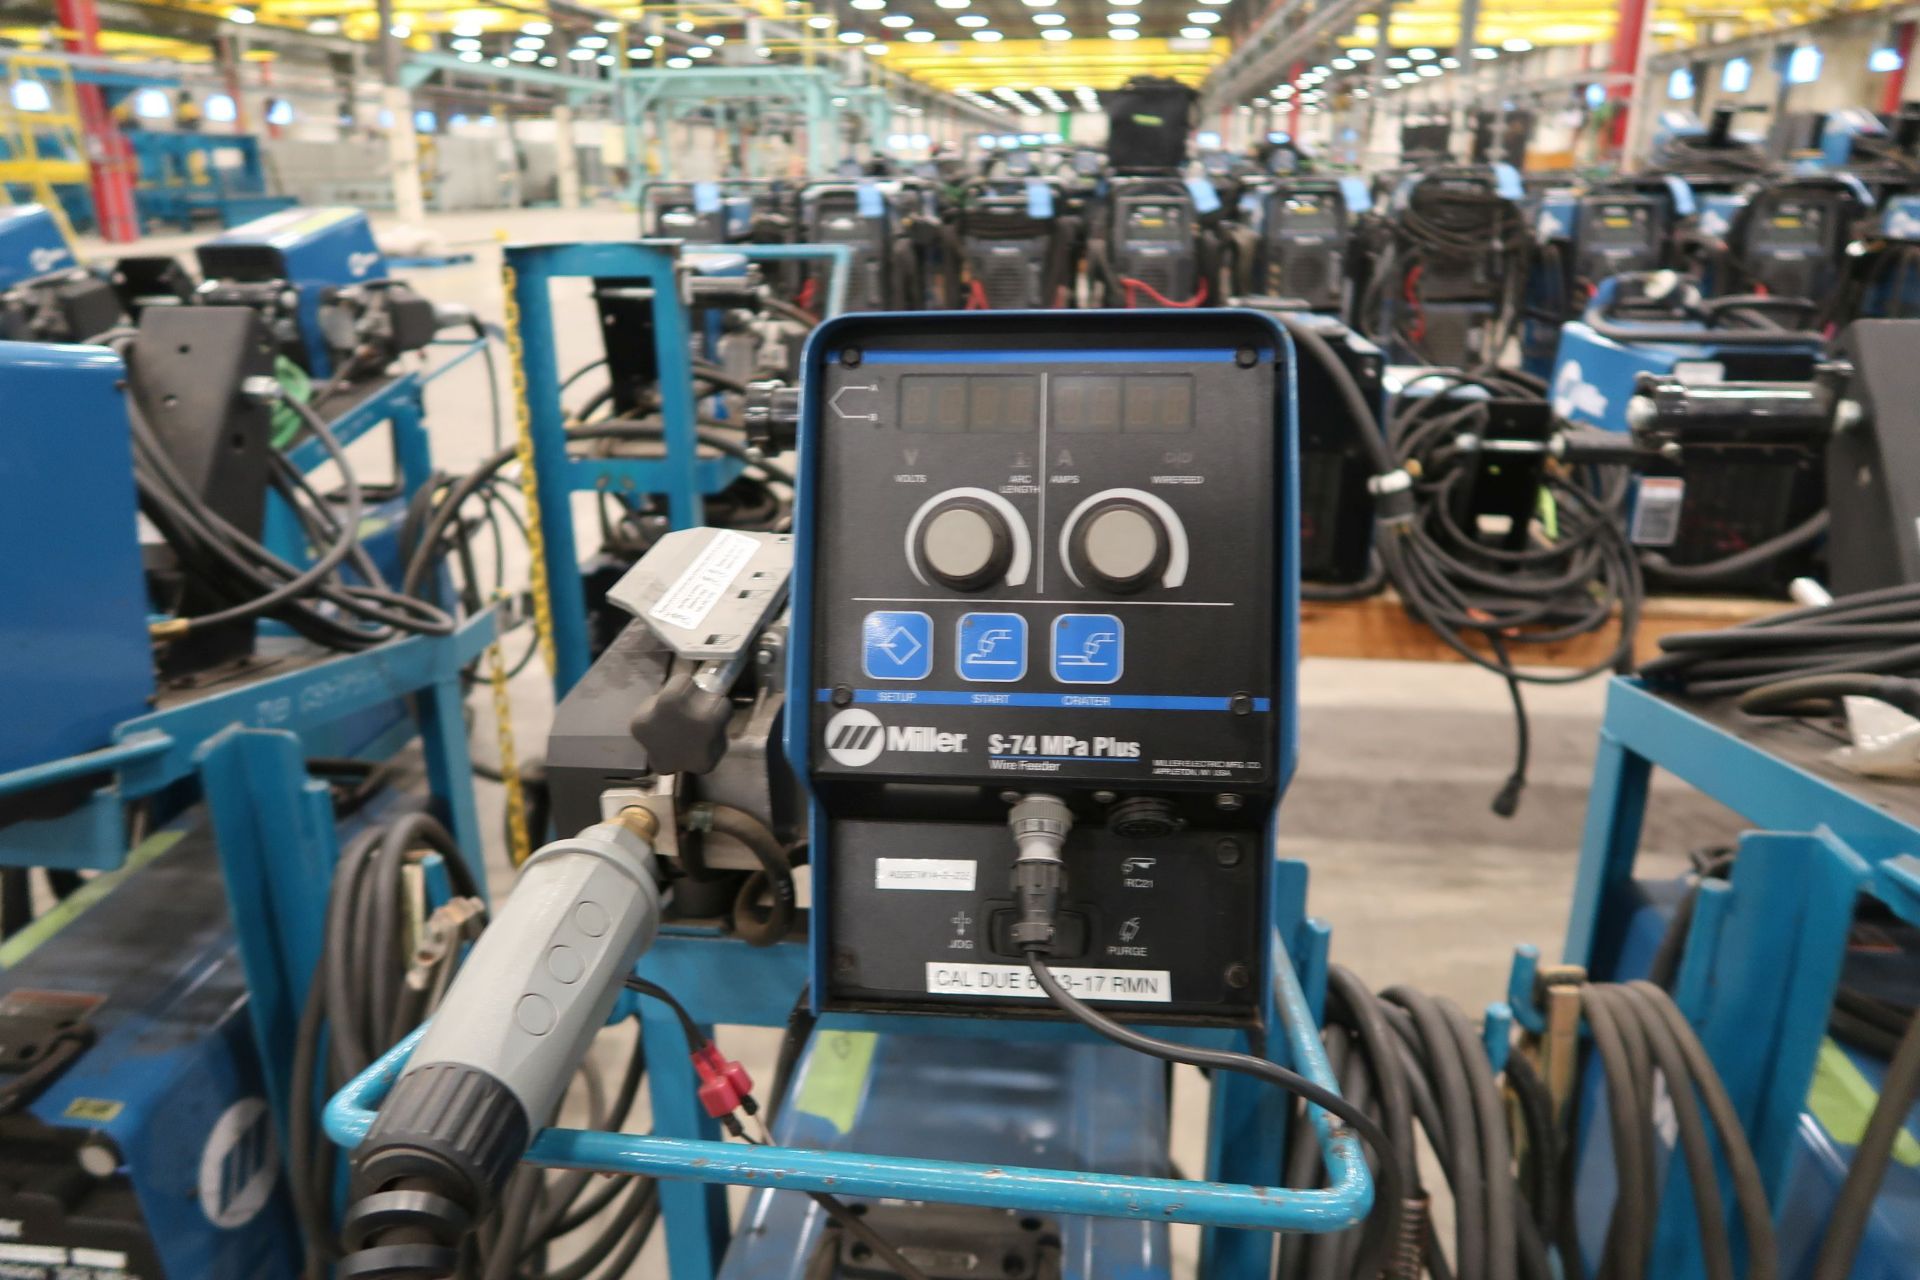 350 AMP MILLER INVISION 352 MPA WELDER WITH MILLER S-74 MPA PLUS WIRE FEEDER; FA 70113-07 - Image 3 of 3